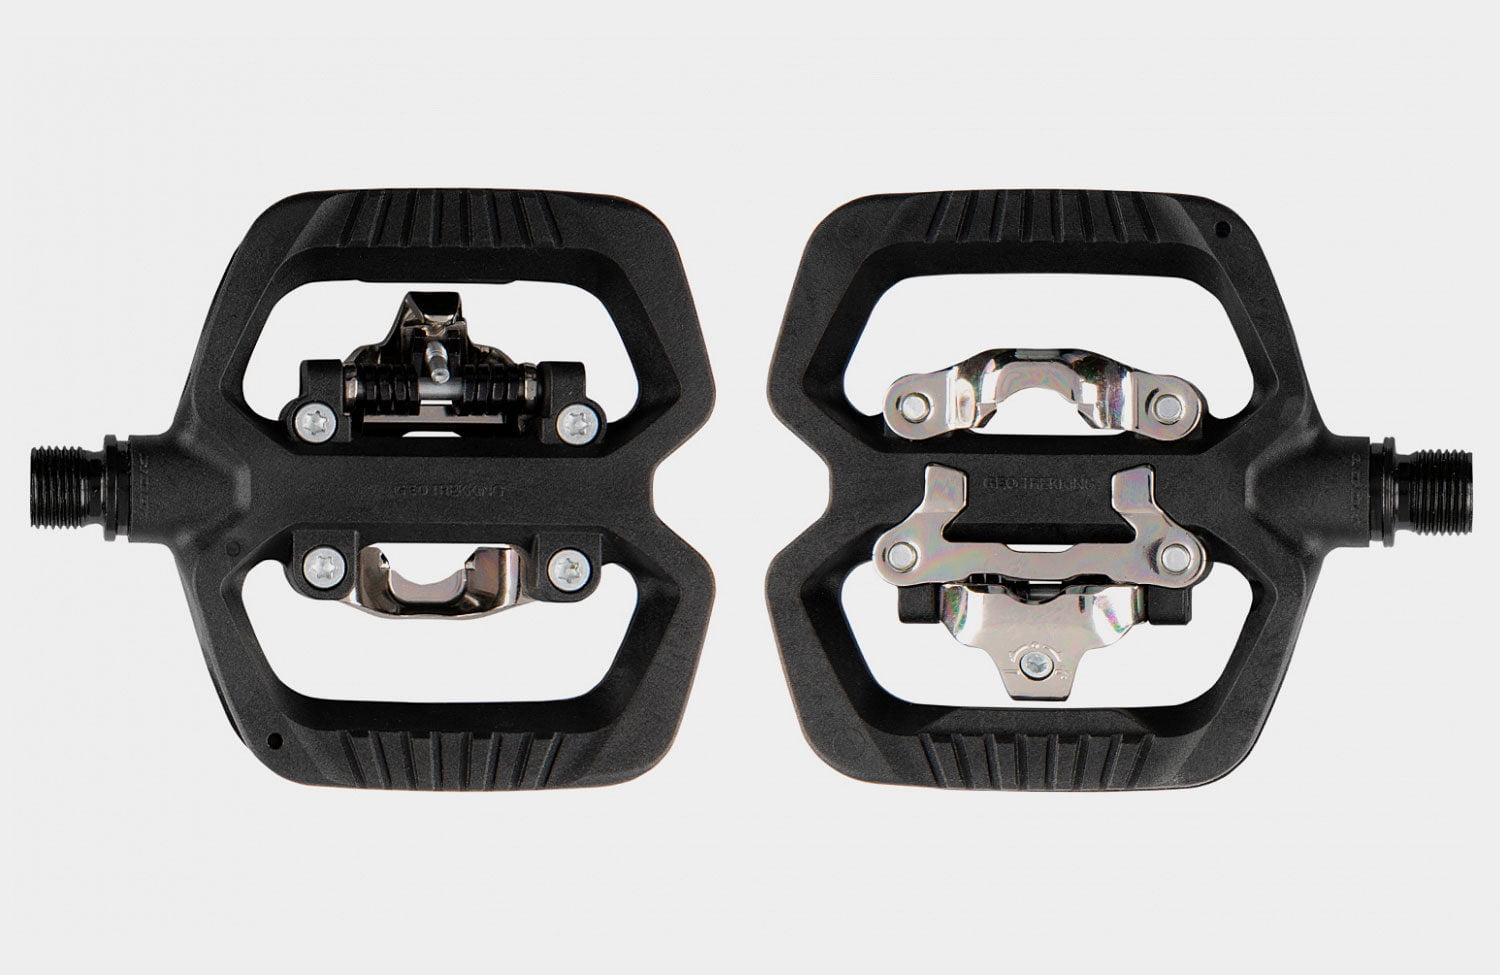 Double utility: new Geo pedal from Look — urbanbike.news